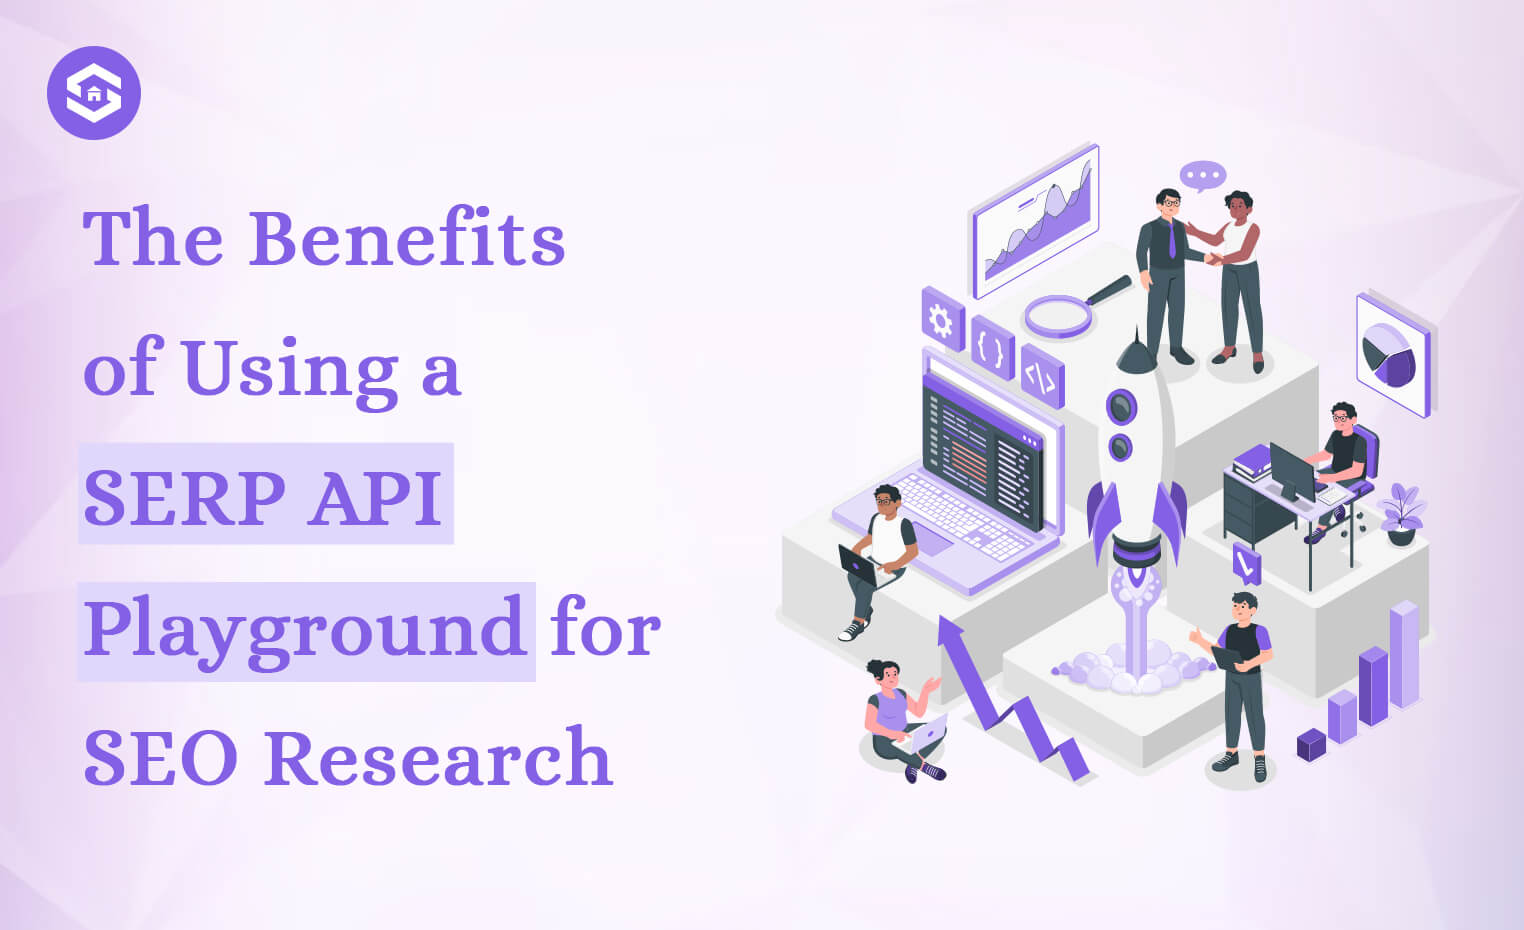 The Benefits of Using a SERP API Playground for SEO Research